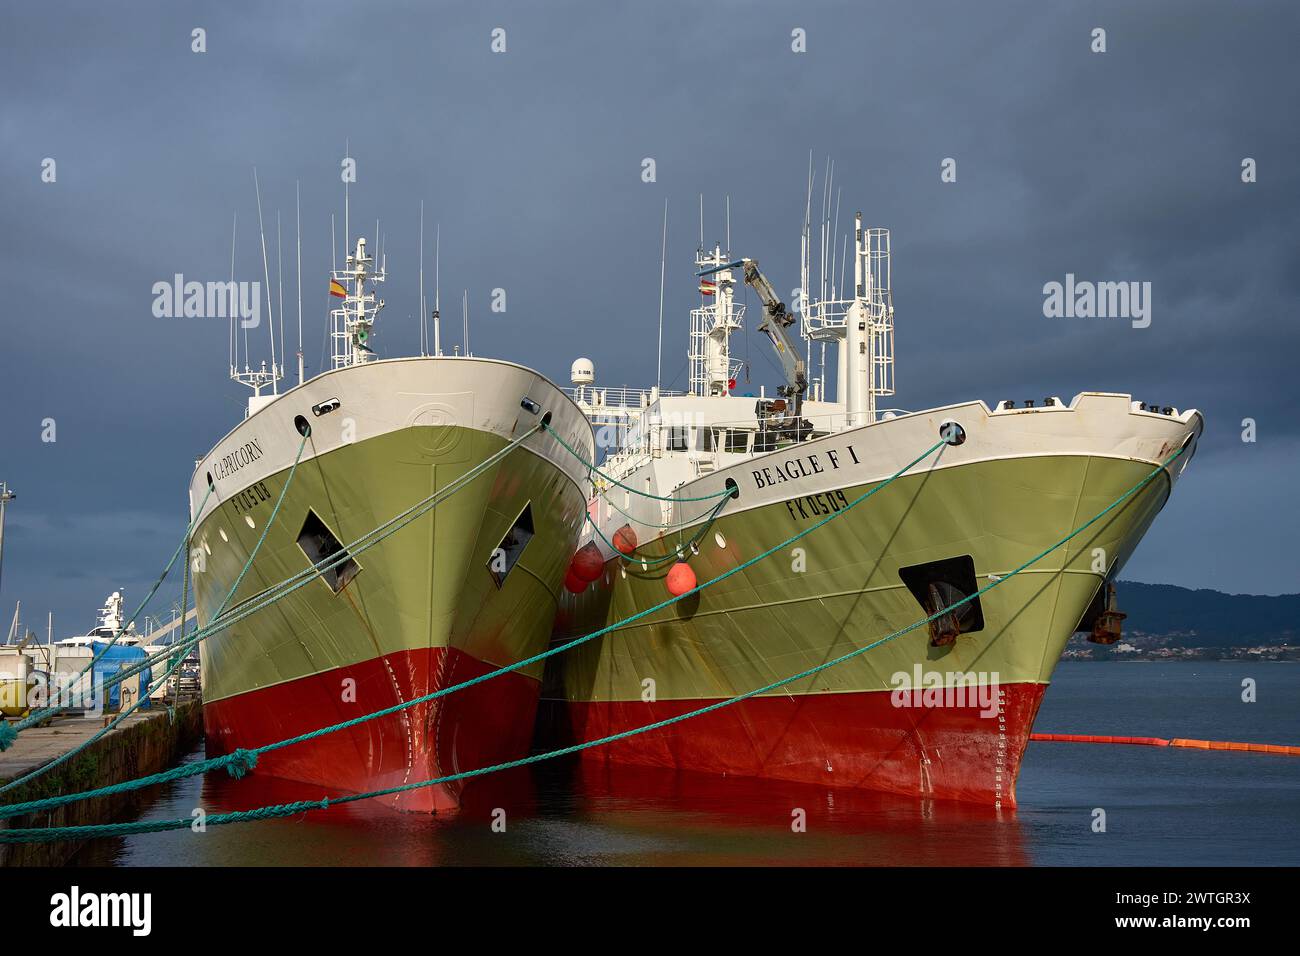 Vigo, Pontevedra, Spain; December 18, 2022; Two freezer trawlers the Capricorn and the Beagle seen from the bow with rust docked in the port of Vigo o Stock Photo